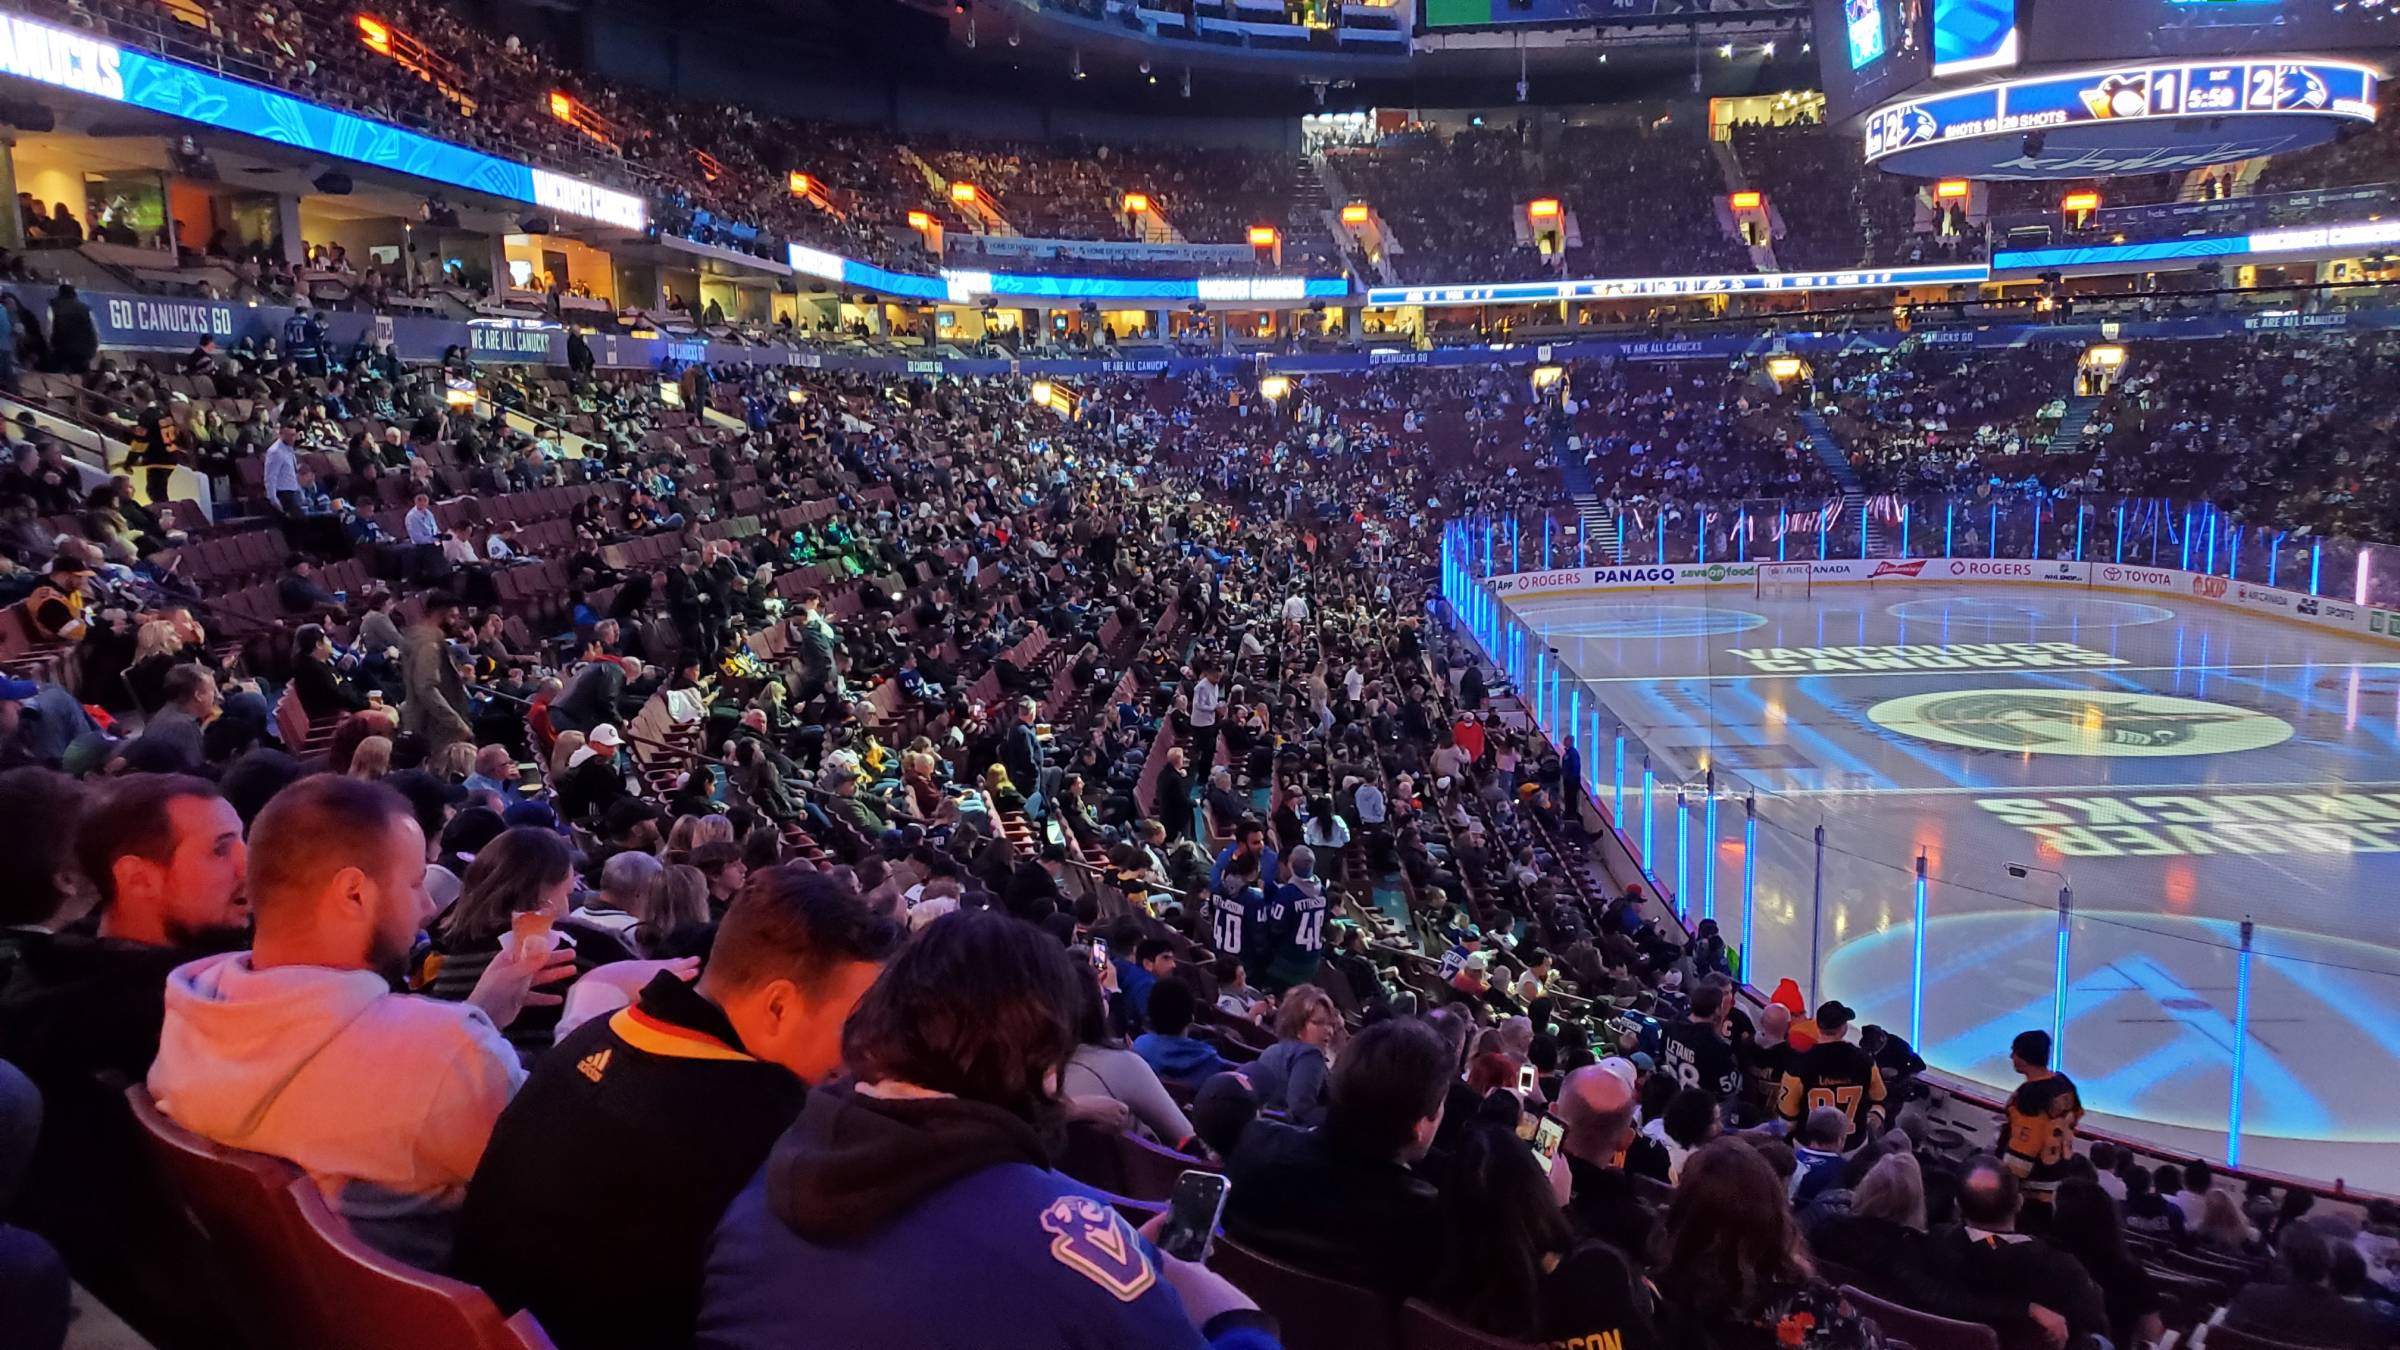 Plaza Level Seating at Rogers Arena